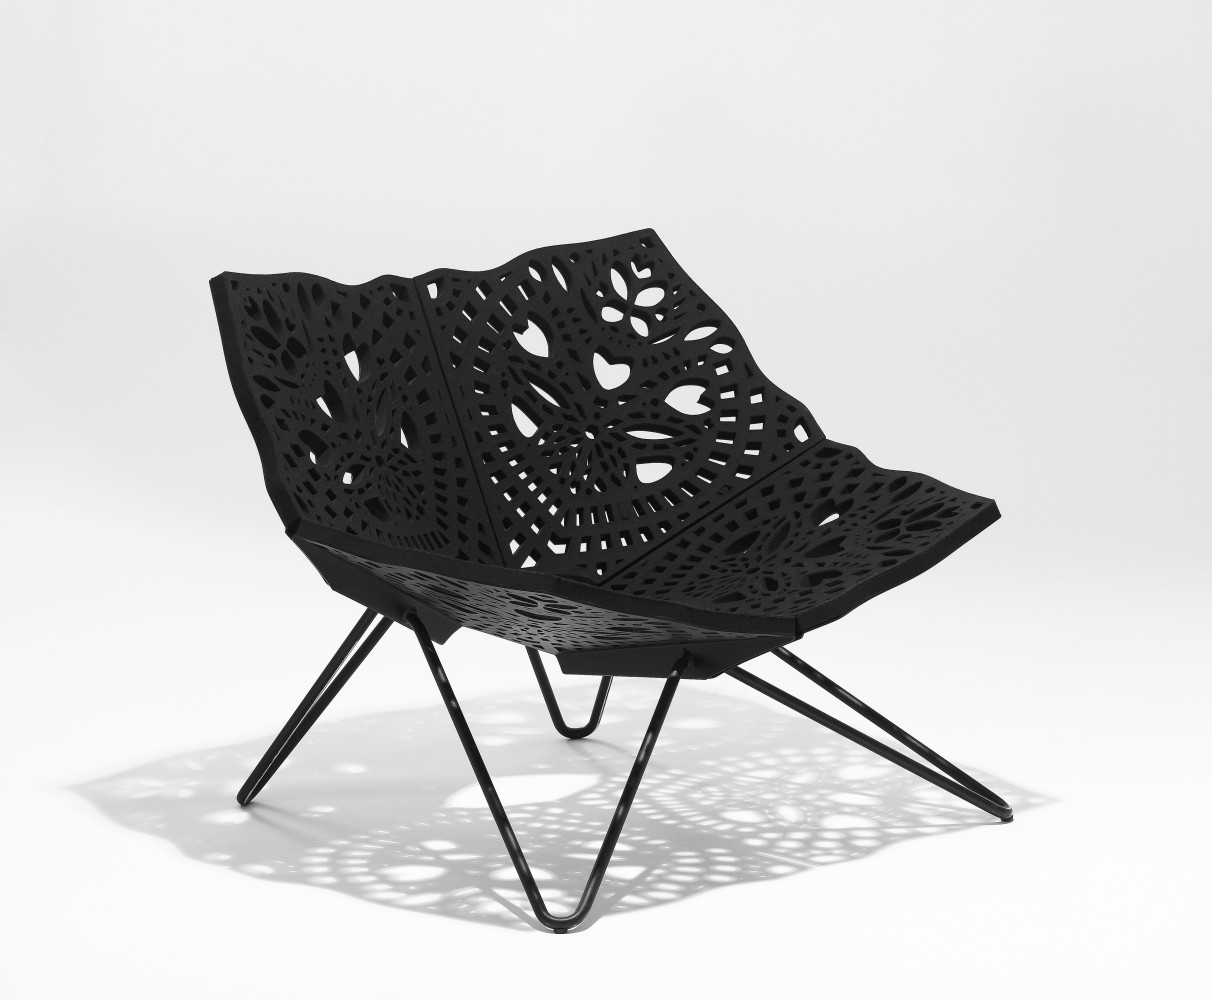 aser-cut steel and rubber chair resembling lace